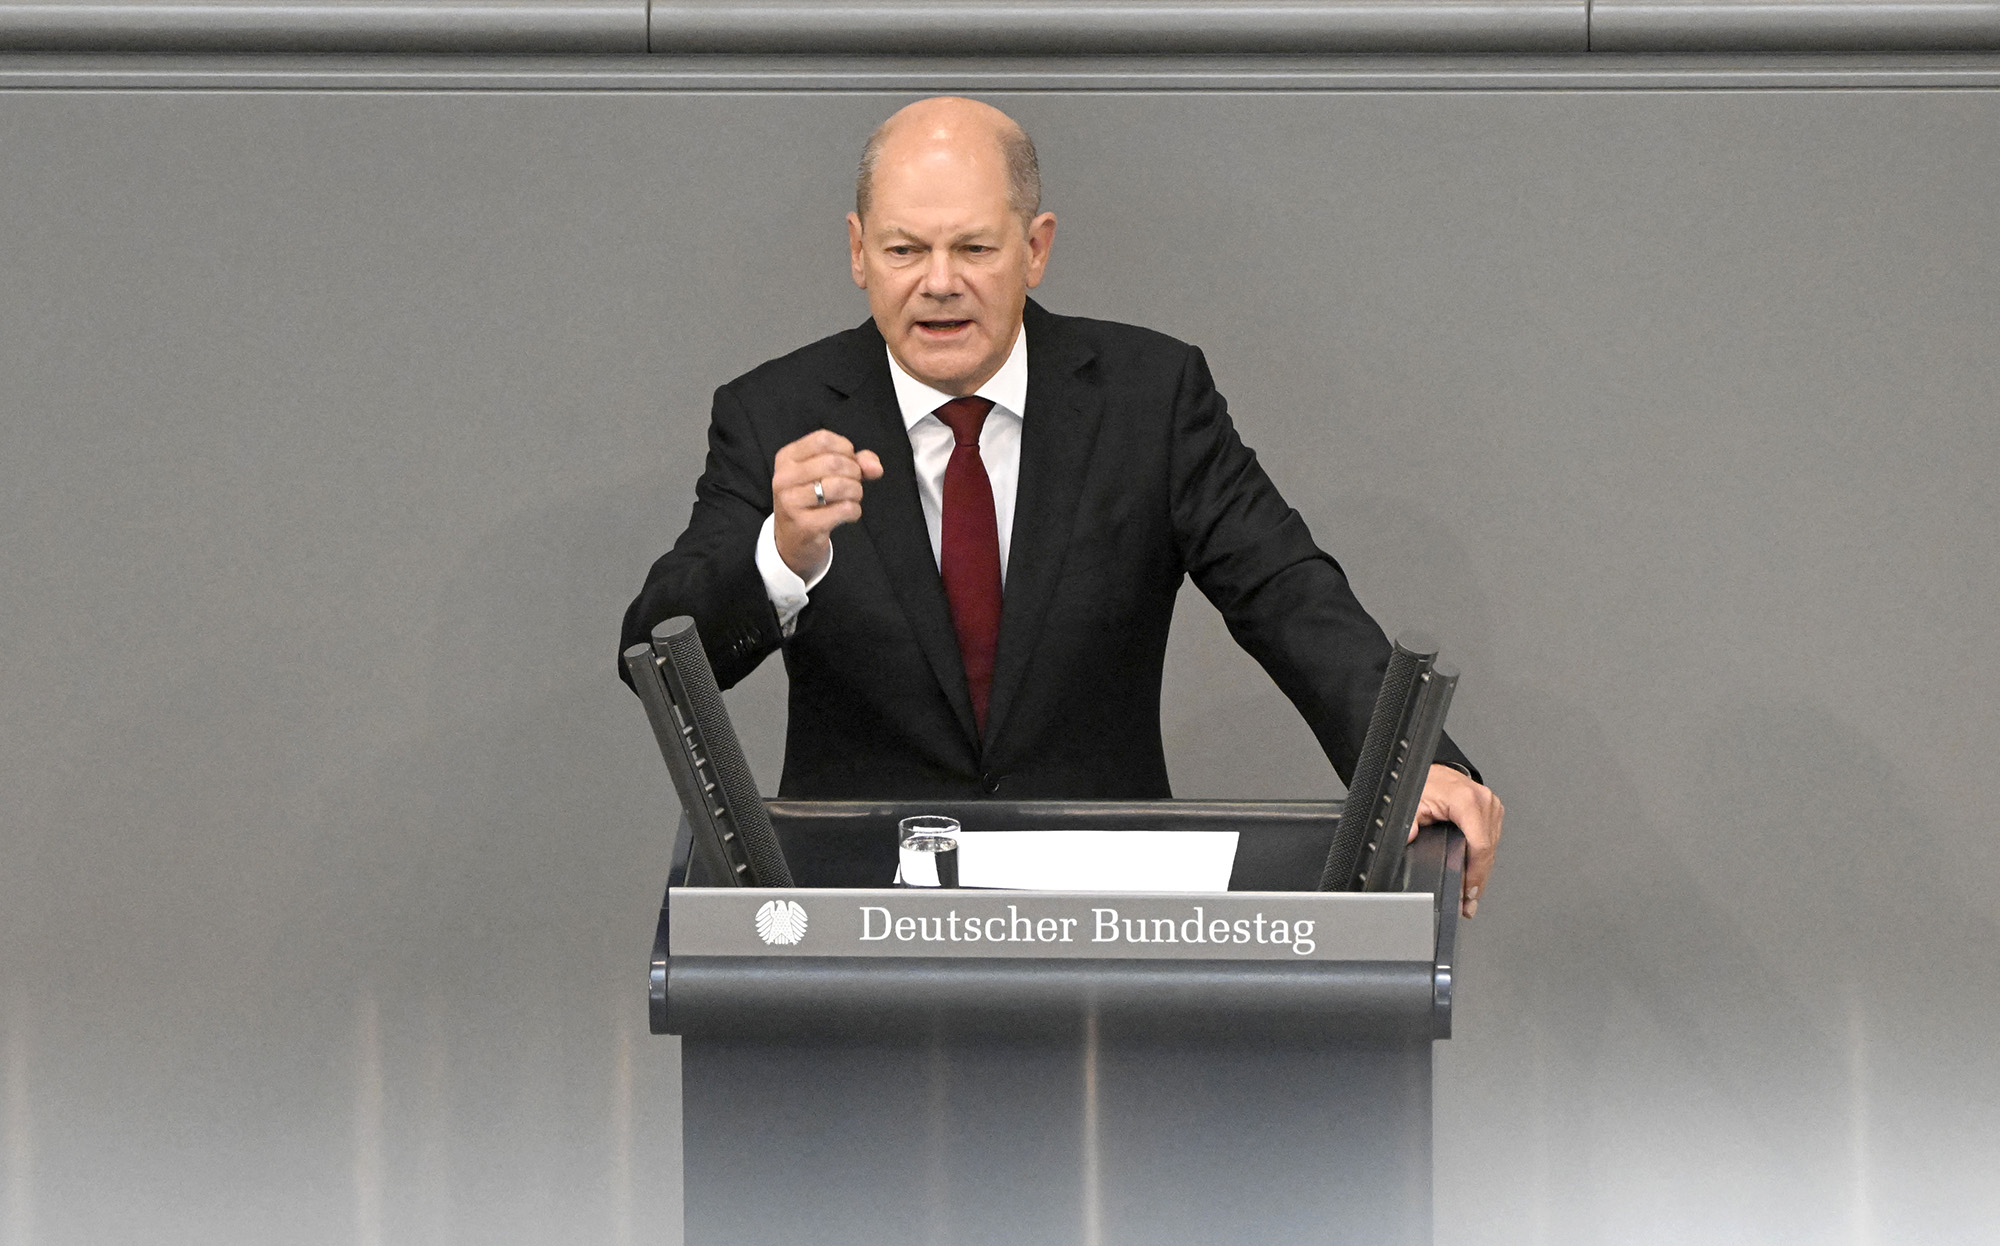 German Chancellor Olaf Scholz addresses delegates during a debate on the federal budget 2023 at the Bundestag on September 7, in Berlin, Germany.